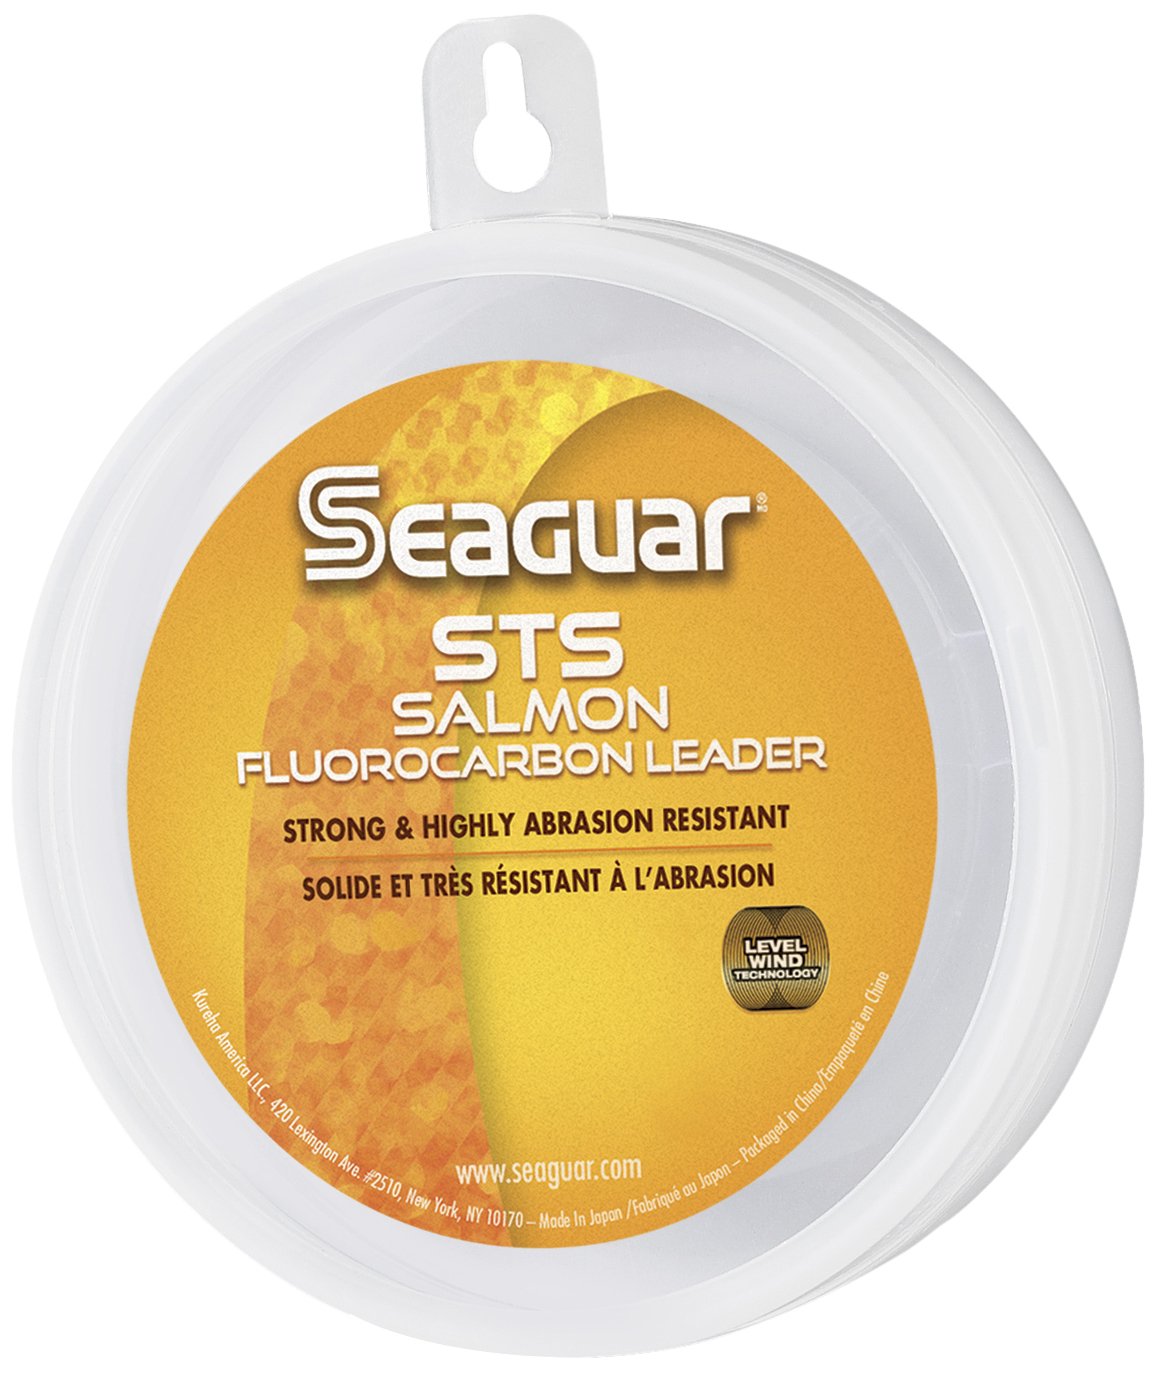 Seaguar STS Salmon Fluorocarbon Leader Material 30lb 100yd